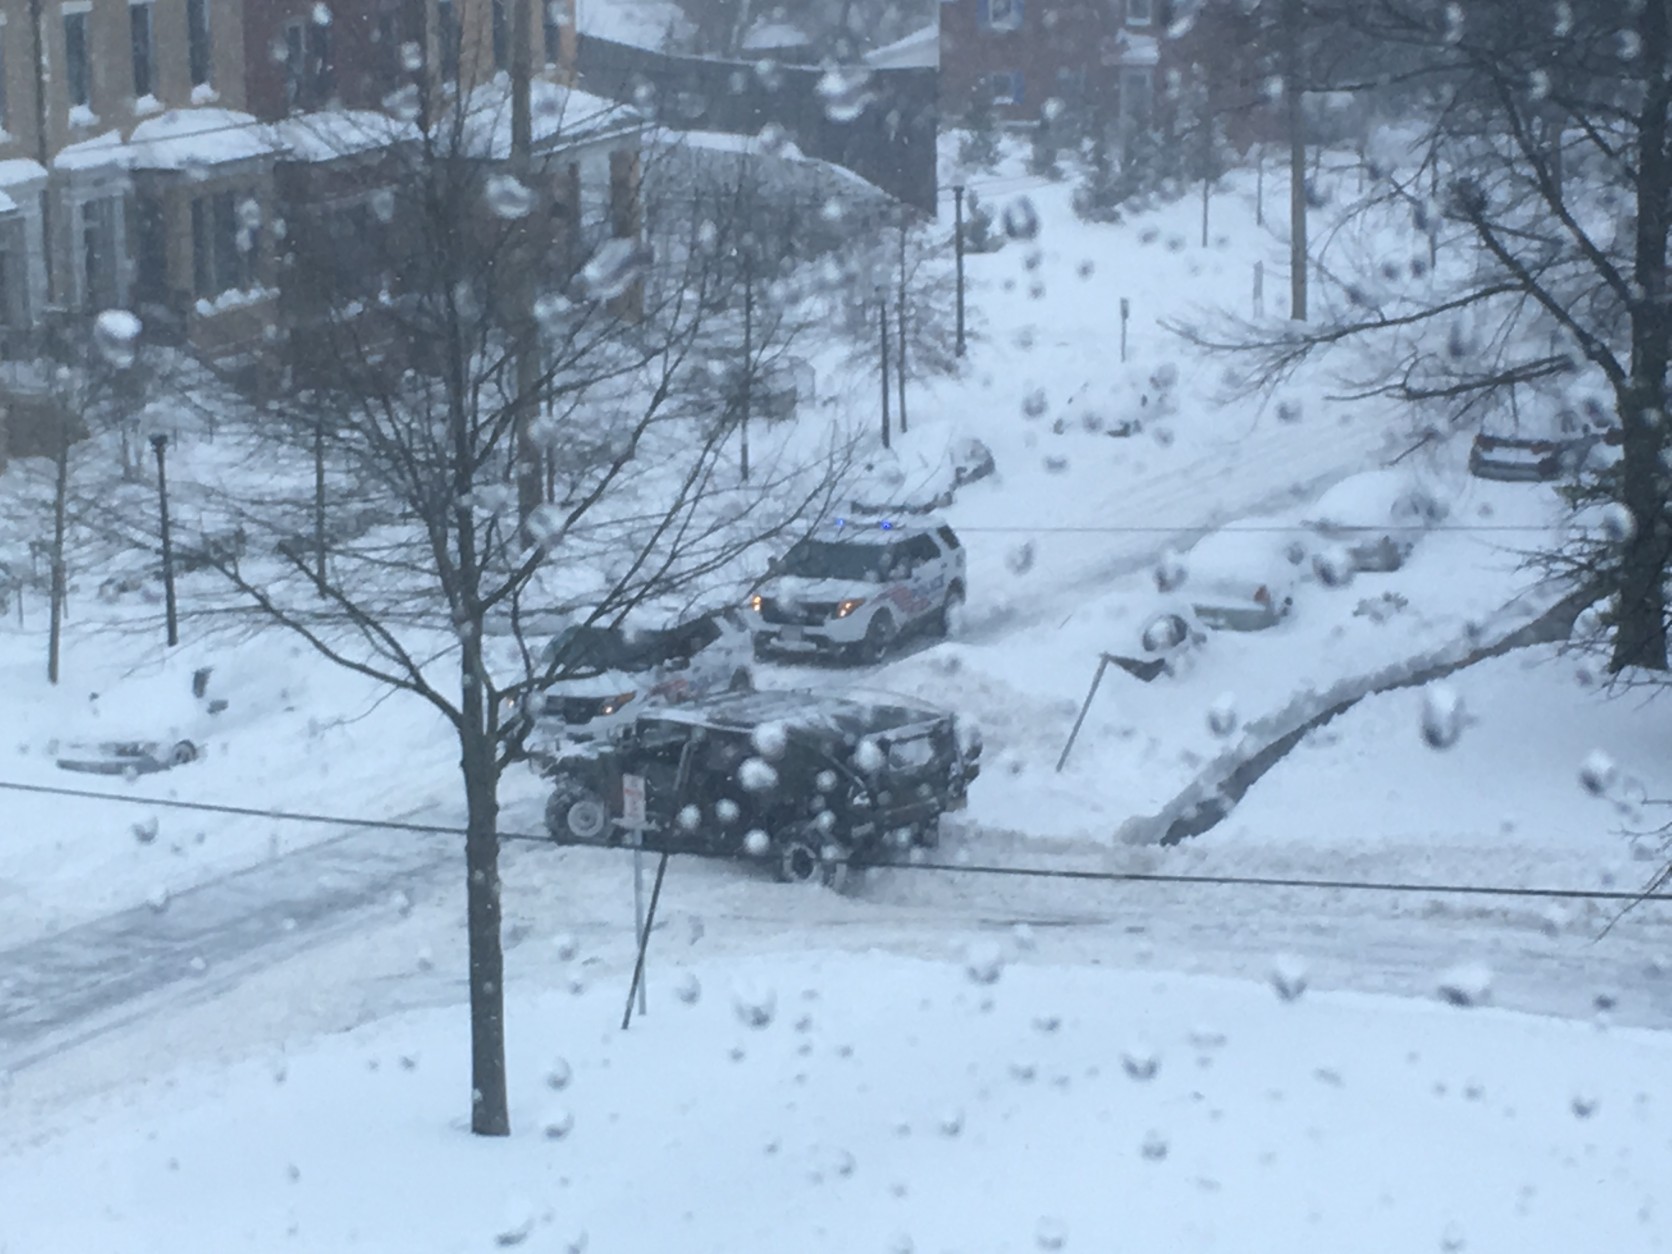 A National Guard vehicle gets stuck on the road in Northwest D.C. on Saturday. (WTOP/Keara Dowd)